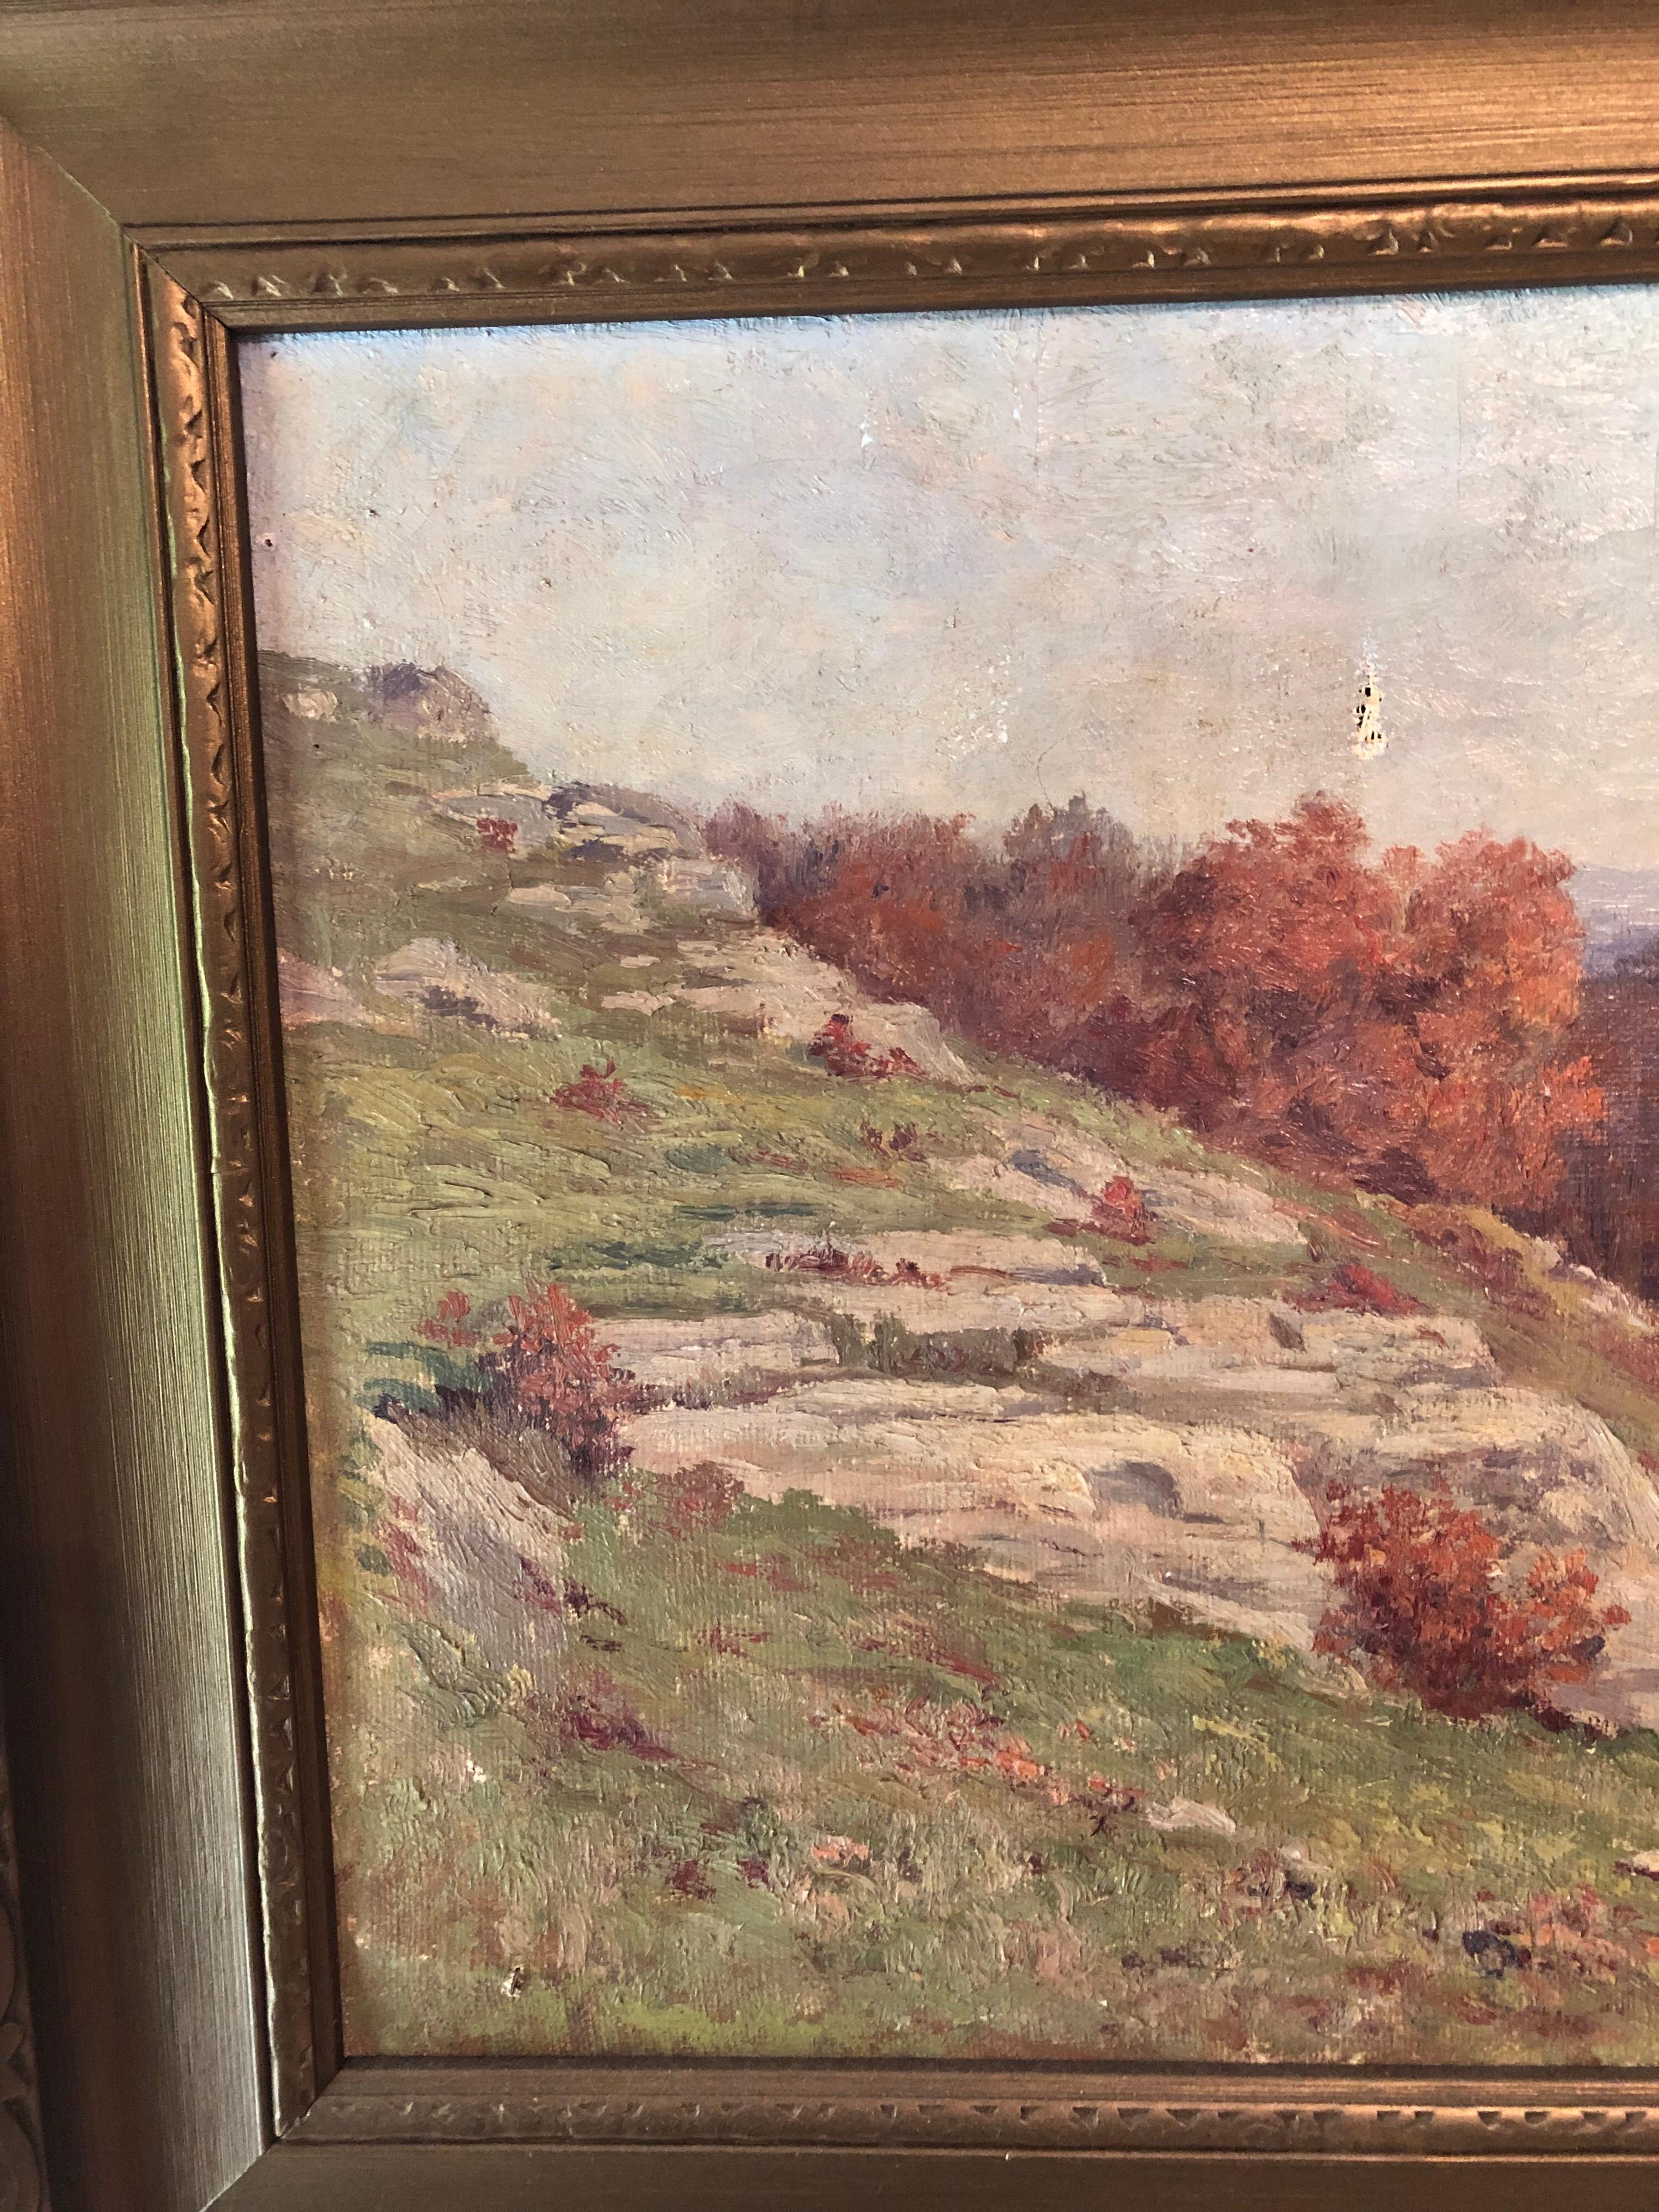 Impressionistic autumnal Massachusetts landscape painting featuring a rocky sloping Hillside with trees in peak foliage set against lavender mountains. Signed lower right margin M.E. Dickinson, 1911. Arts & Crafts gold painted cove moulded frame,